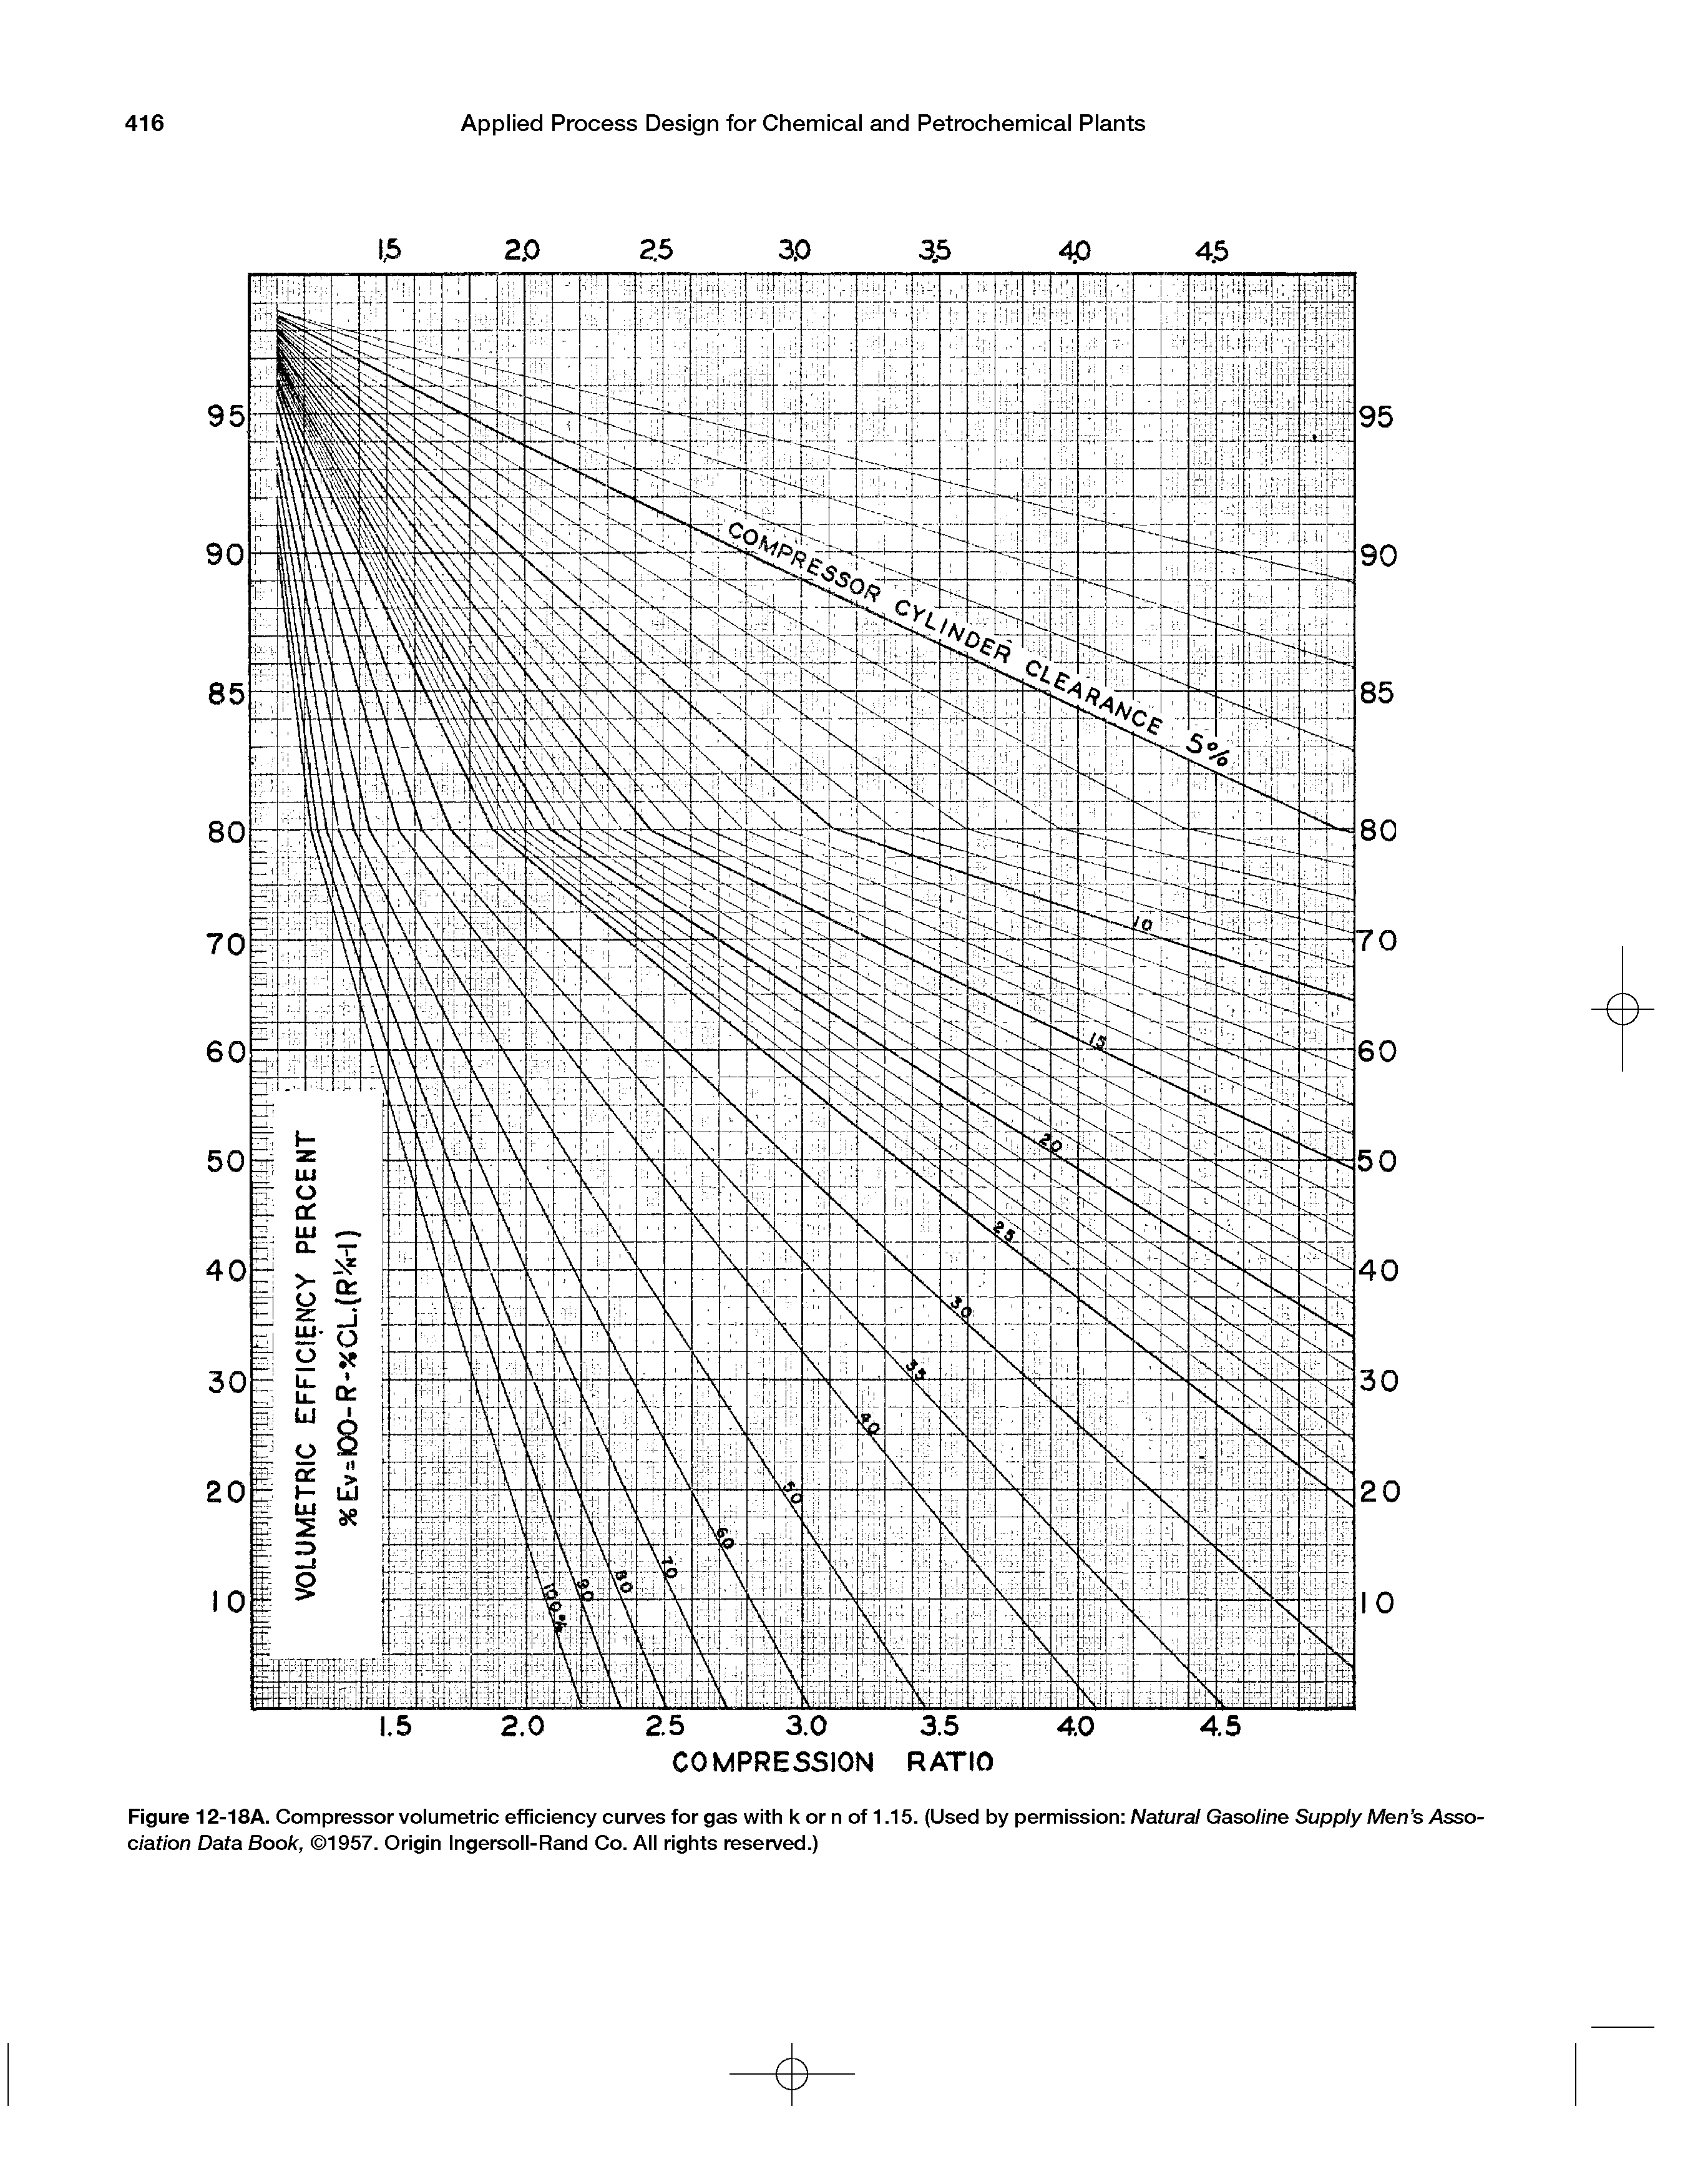 Figure 12-18A. Compressor volumetric efficiency curves for gas with k or n of 1.15. (Used by permission Natural Gasoline Supply Men s Association Data Book, 1957. Origin Ingersoll-Rand Co. All rights reserved.)...